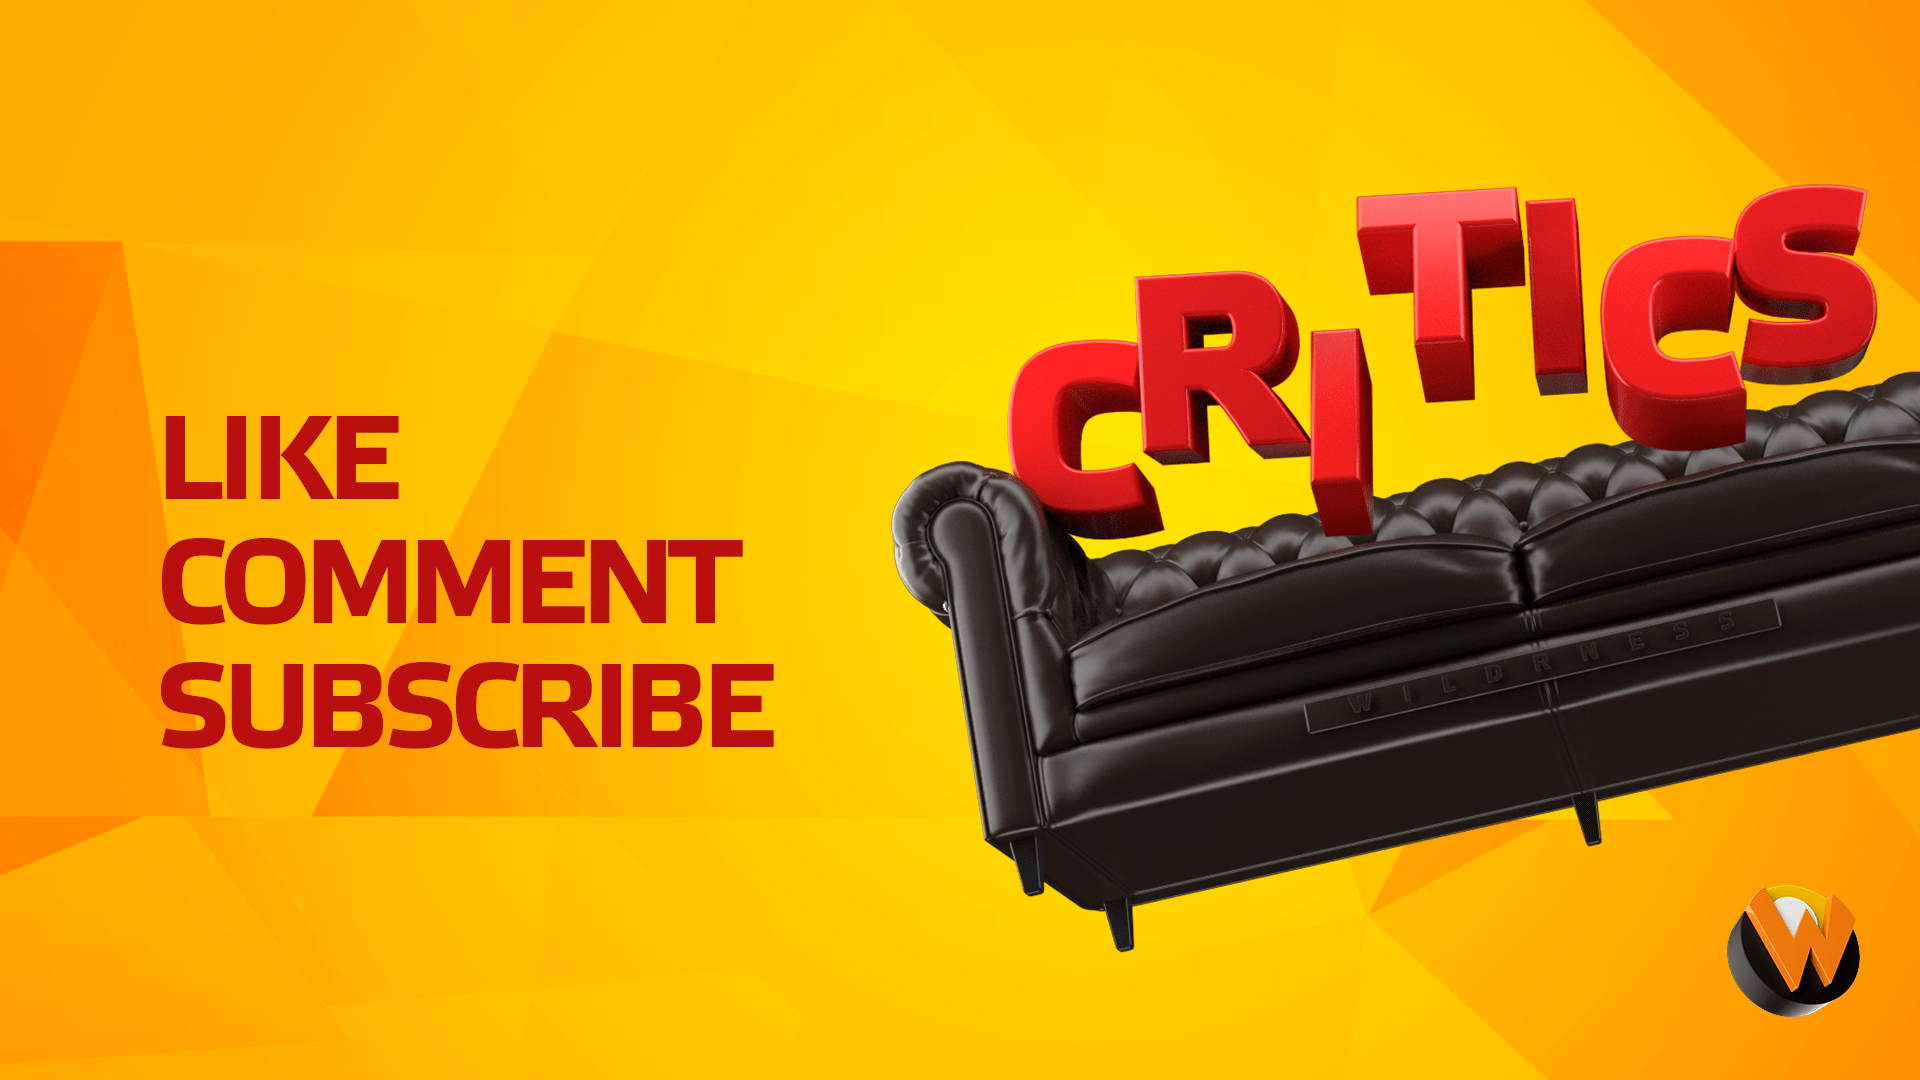 Couch Critics, a collective specialised in reviewing movies. 